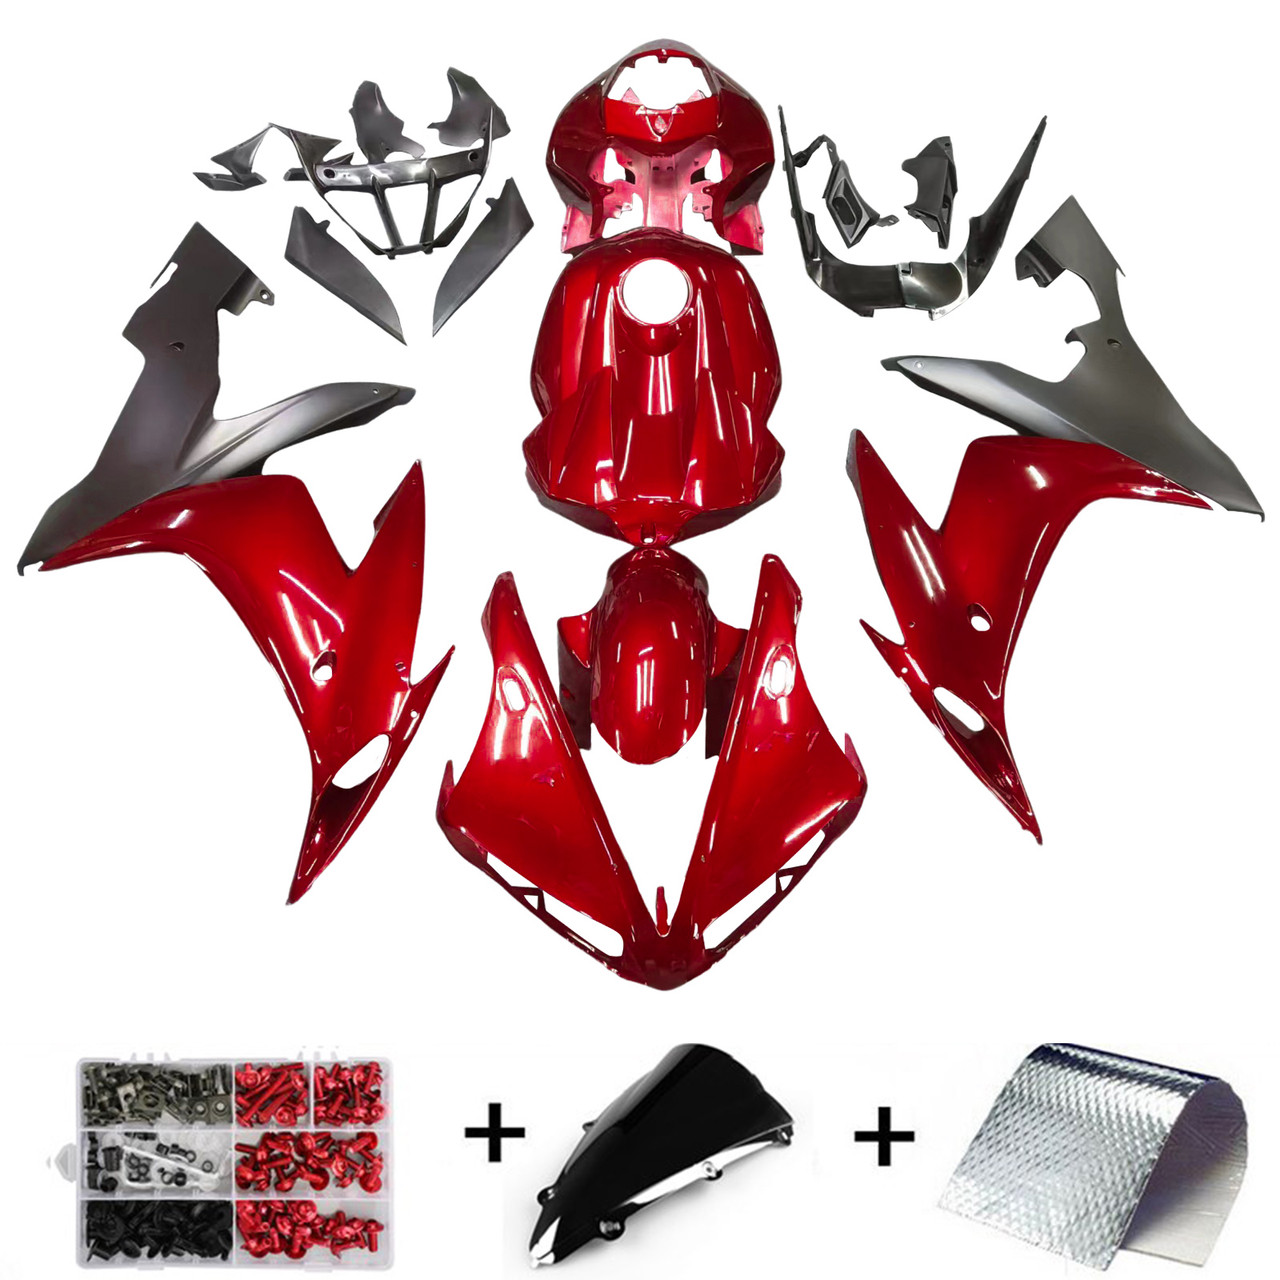 Amotopart injection Molding Fairing Fit for 2004 2005 2006 YAMAHA YZF R1 ABS Plastic